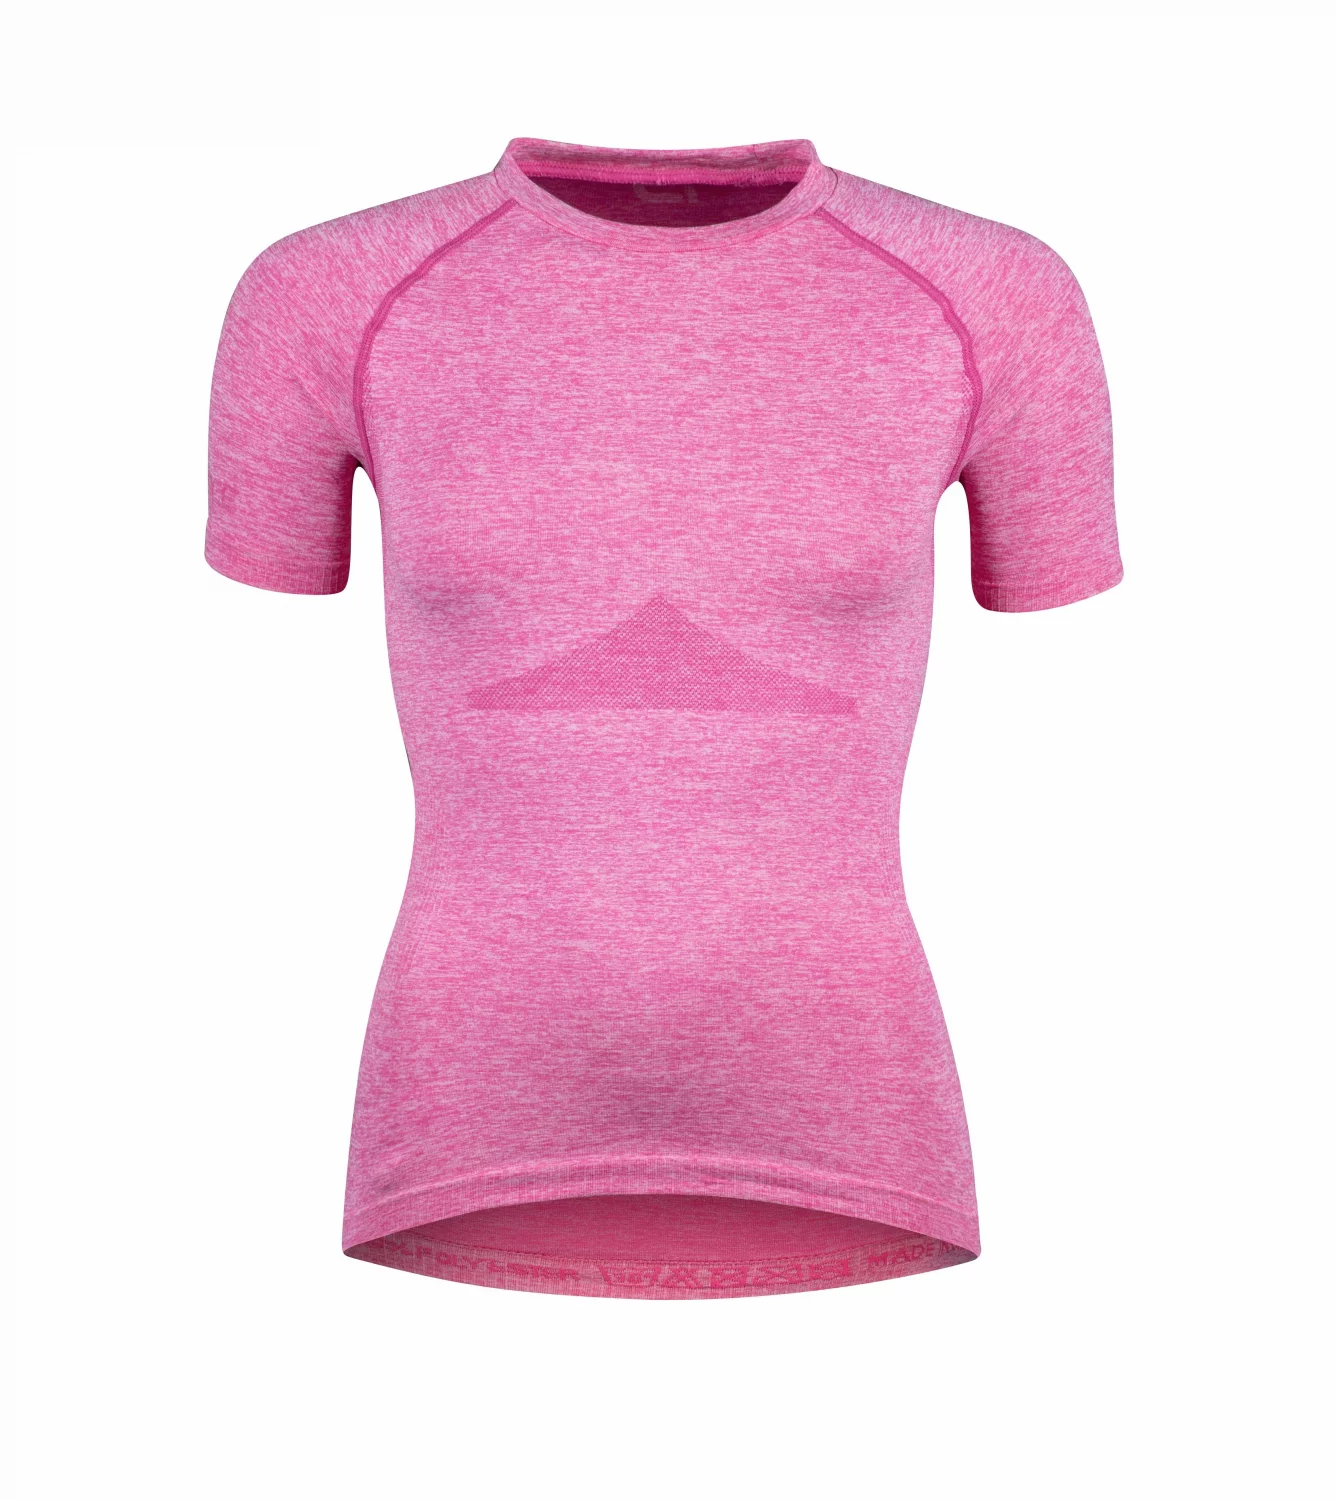 Force Soft Short Lady pink XS/S